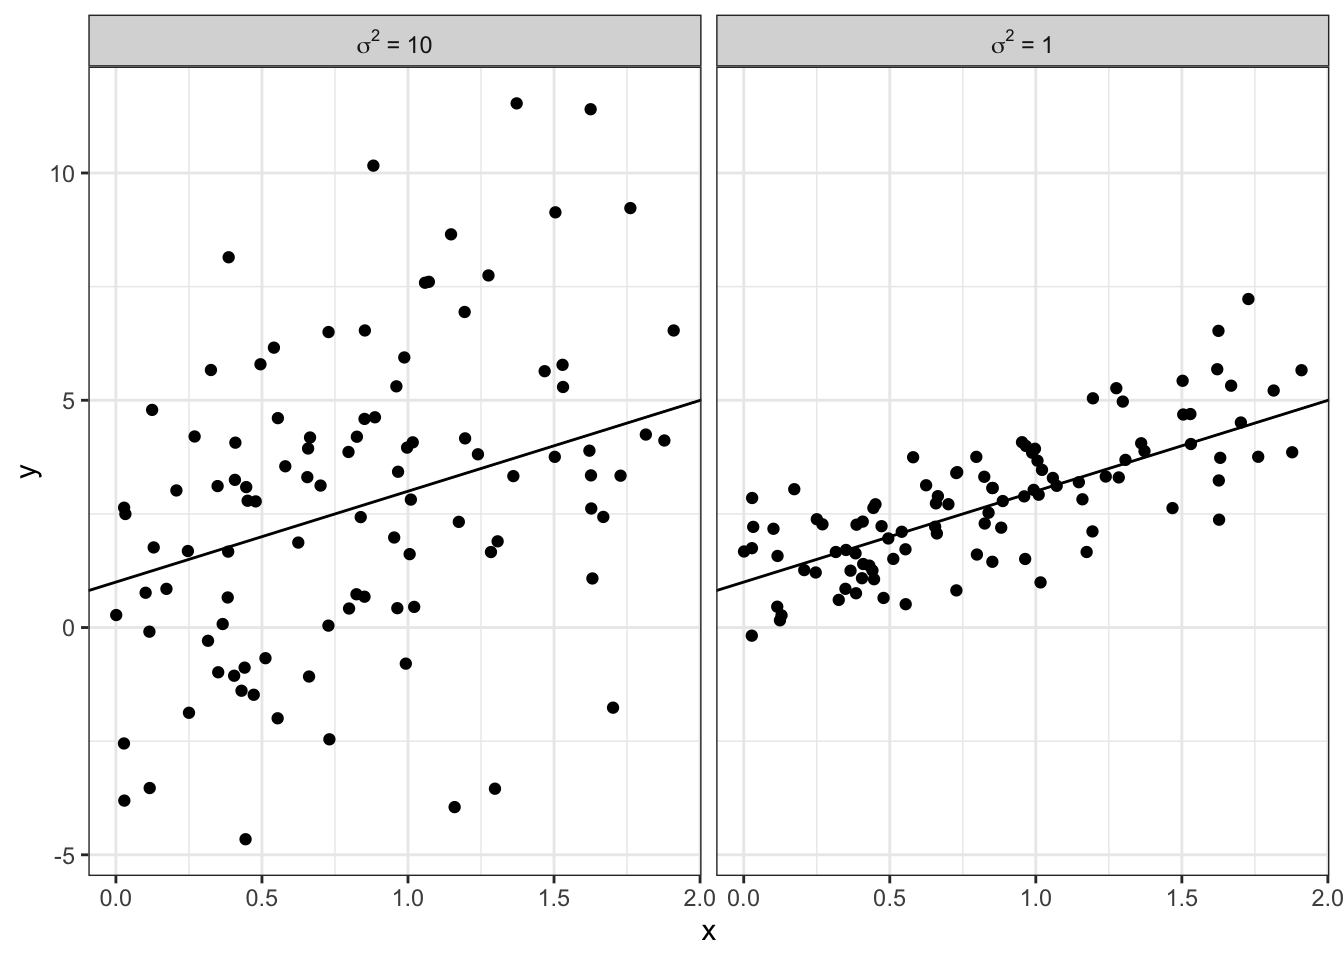 Simulated data showing the impact of different values of $\sigma^2$.